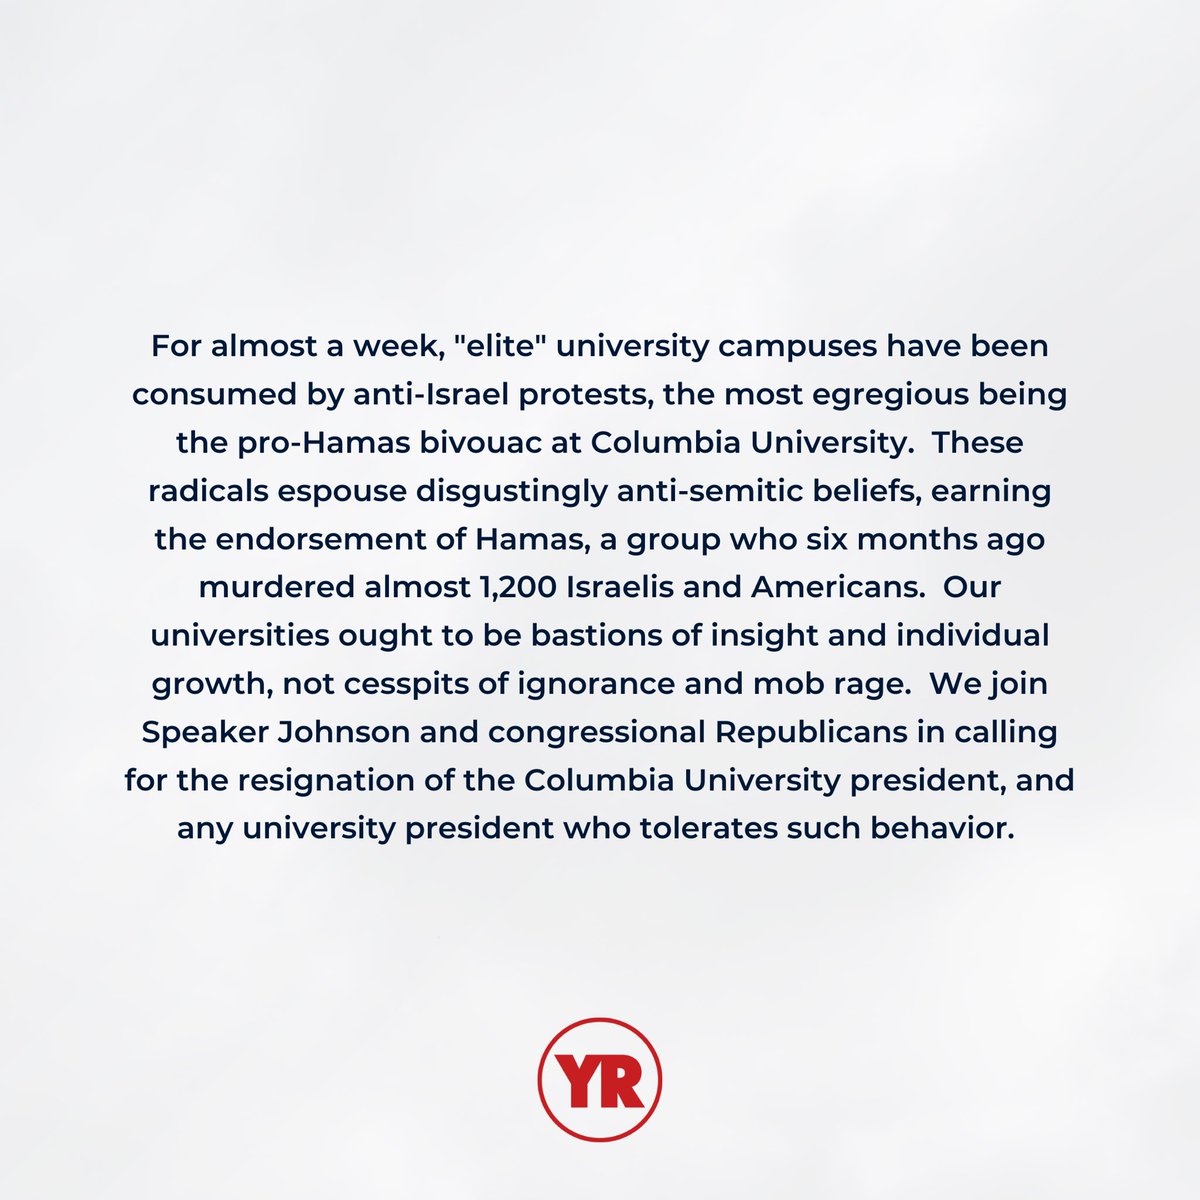 We join Speaker Johnson and congressional Republicans in calling for the resignation of the Columbia University president, and any university president who tolerates such behavior.